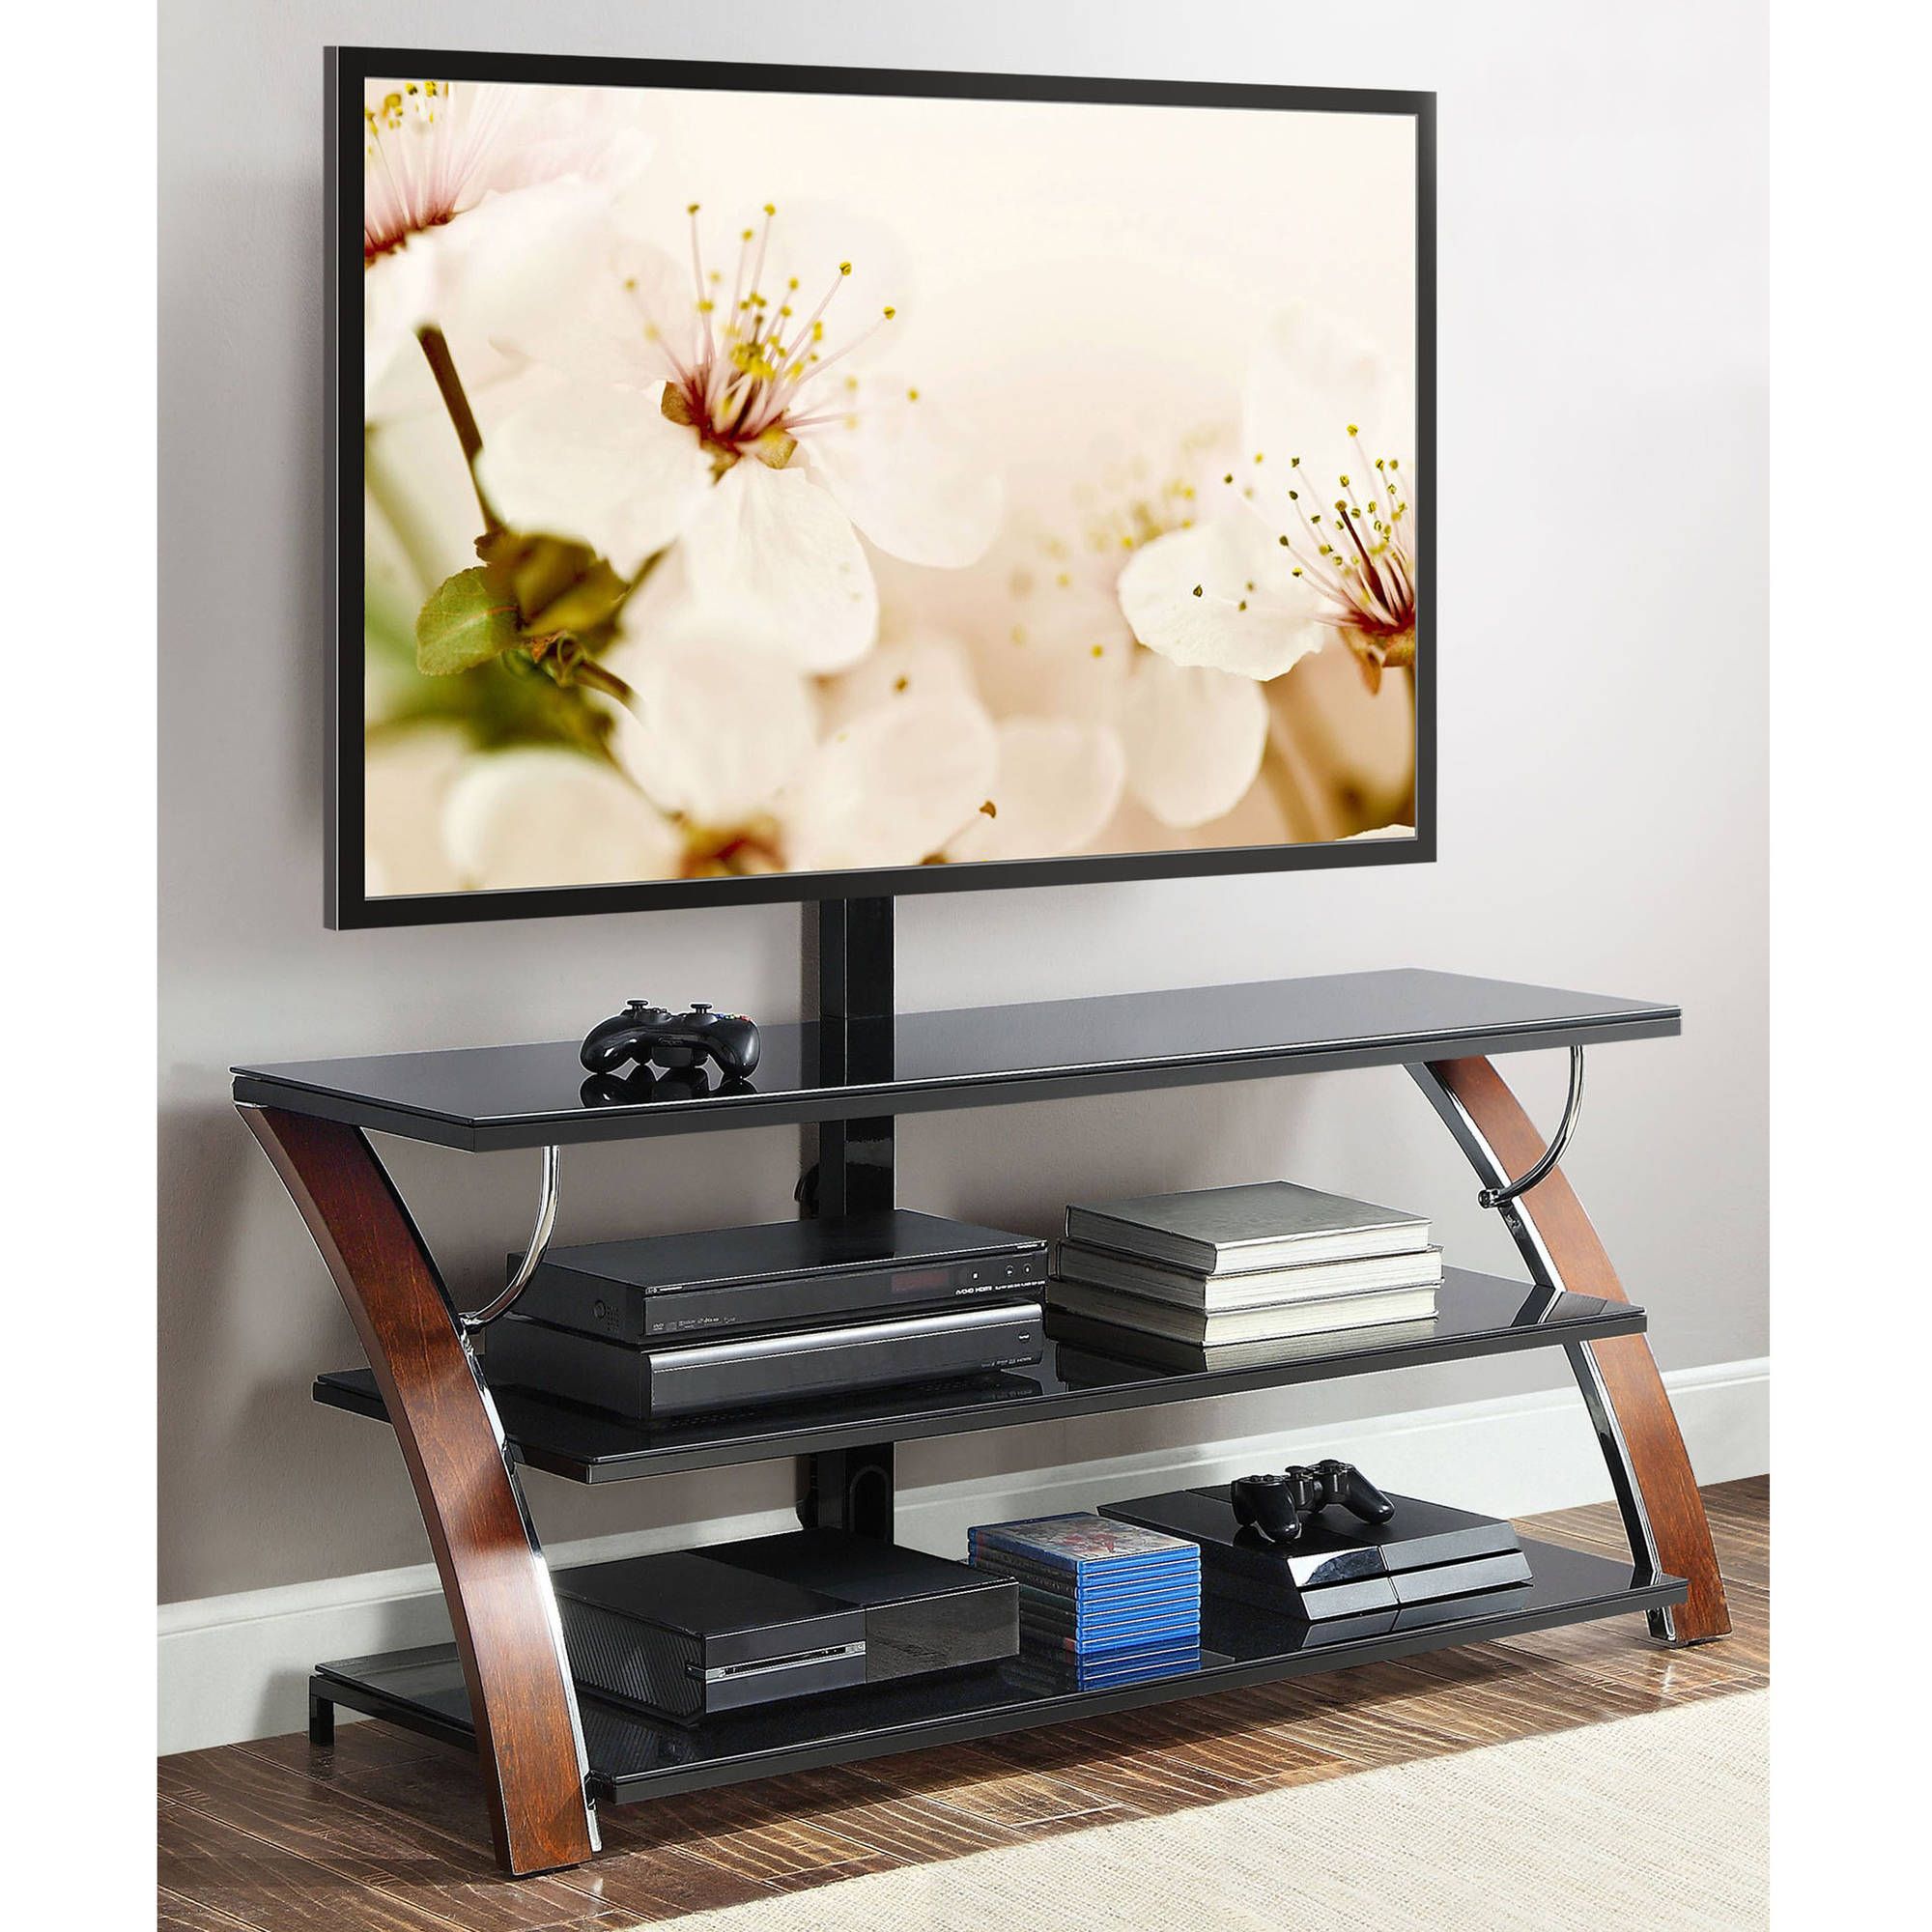 Mainstays 4 Cube Tv Stands In Multiple Finishes For Most Popular Mainstays Tv Stand For Tvs Up To 55", Multiple Finishes (View 4 of 10)